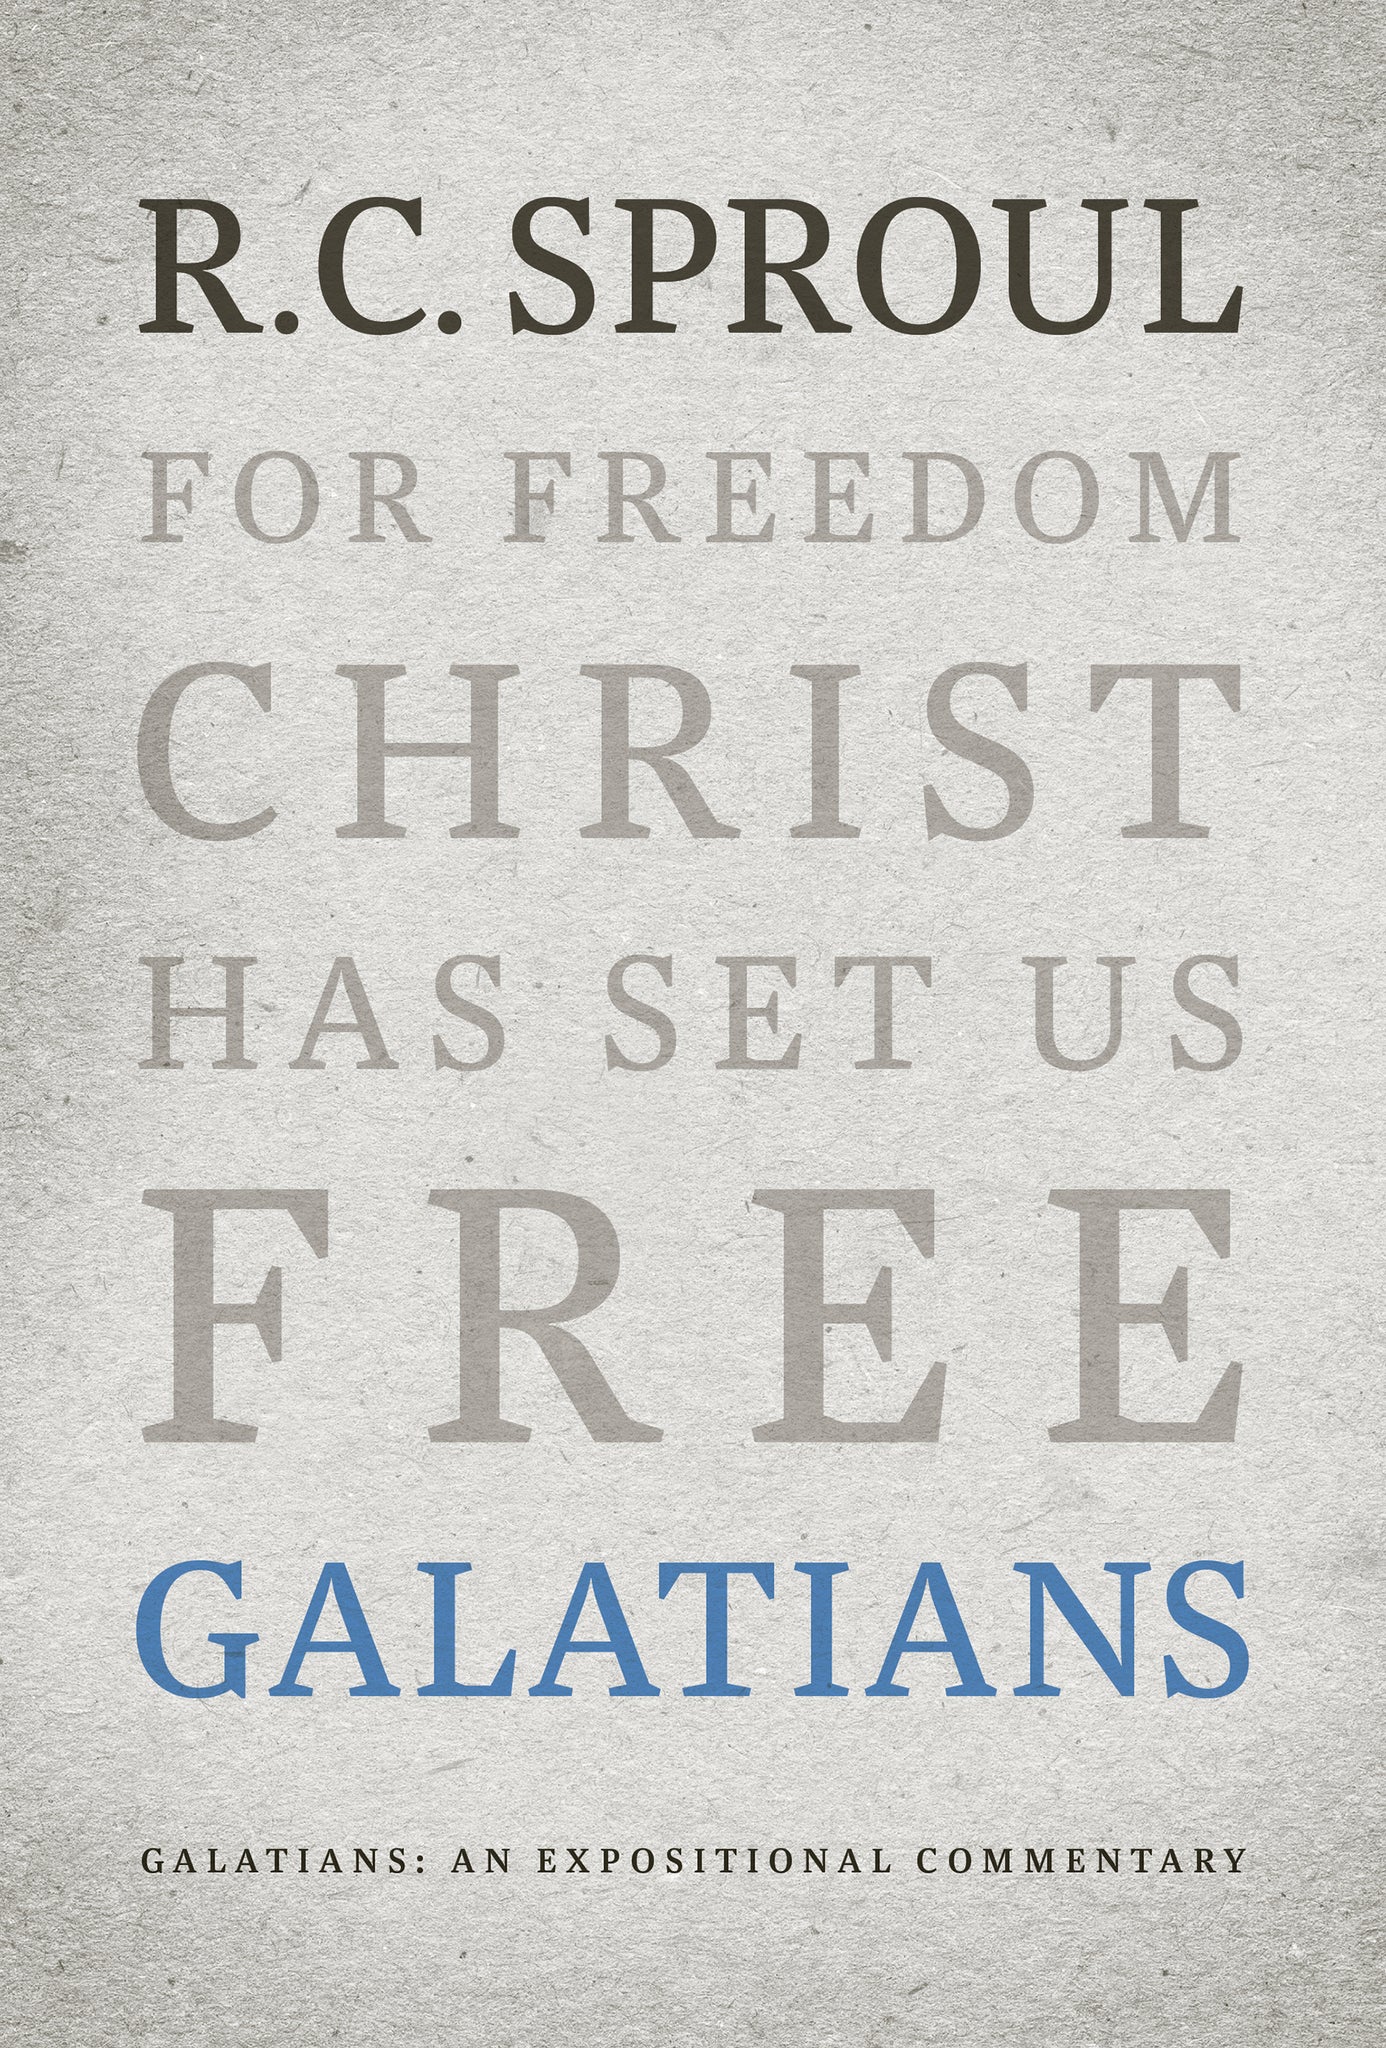 An Expositional Commentary - Galatians: For Freedom Christ has Set us Free